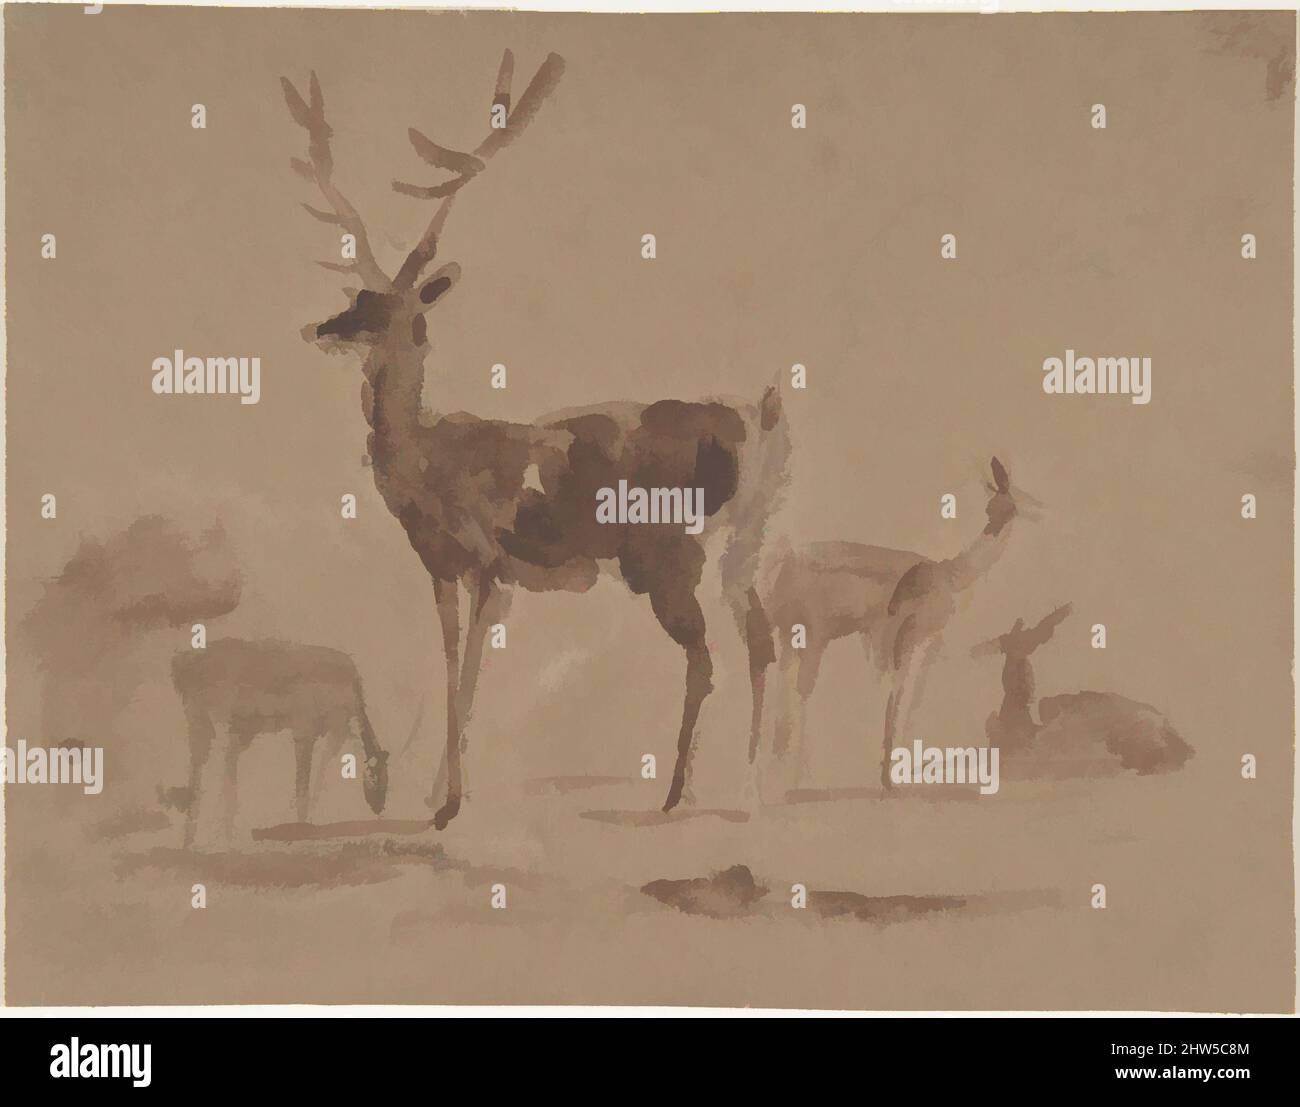 Art inspired by Stag and Its Young, 1820–73, Brush and brown wash over graphite, sheet: 4 1/8 x 5 3/8 in. (10.5 x 13.6 cm), Drawings, Sir Edwin Henry Landseer (British, London 1802–1873 London, Classic works modernized by Artotop with a splash of modernity. Shapes, color and value, eye-catching visual impact on art. Emotions through freedom of artworks in a contemporary way. A timeless message pursuing a wildly creative new direction. Artists turning to the digital medium and creating the Artotop NFT Stock Photo